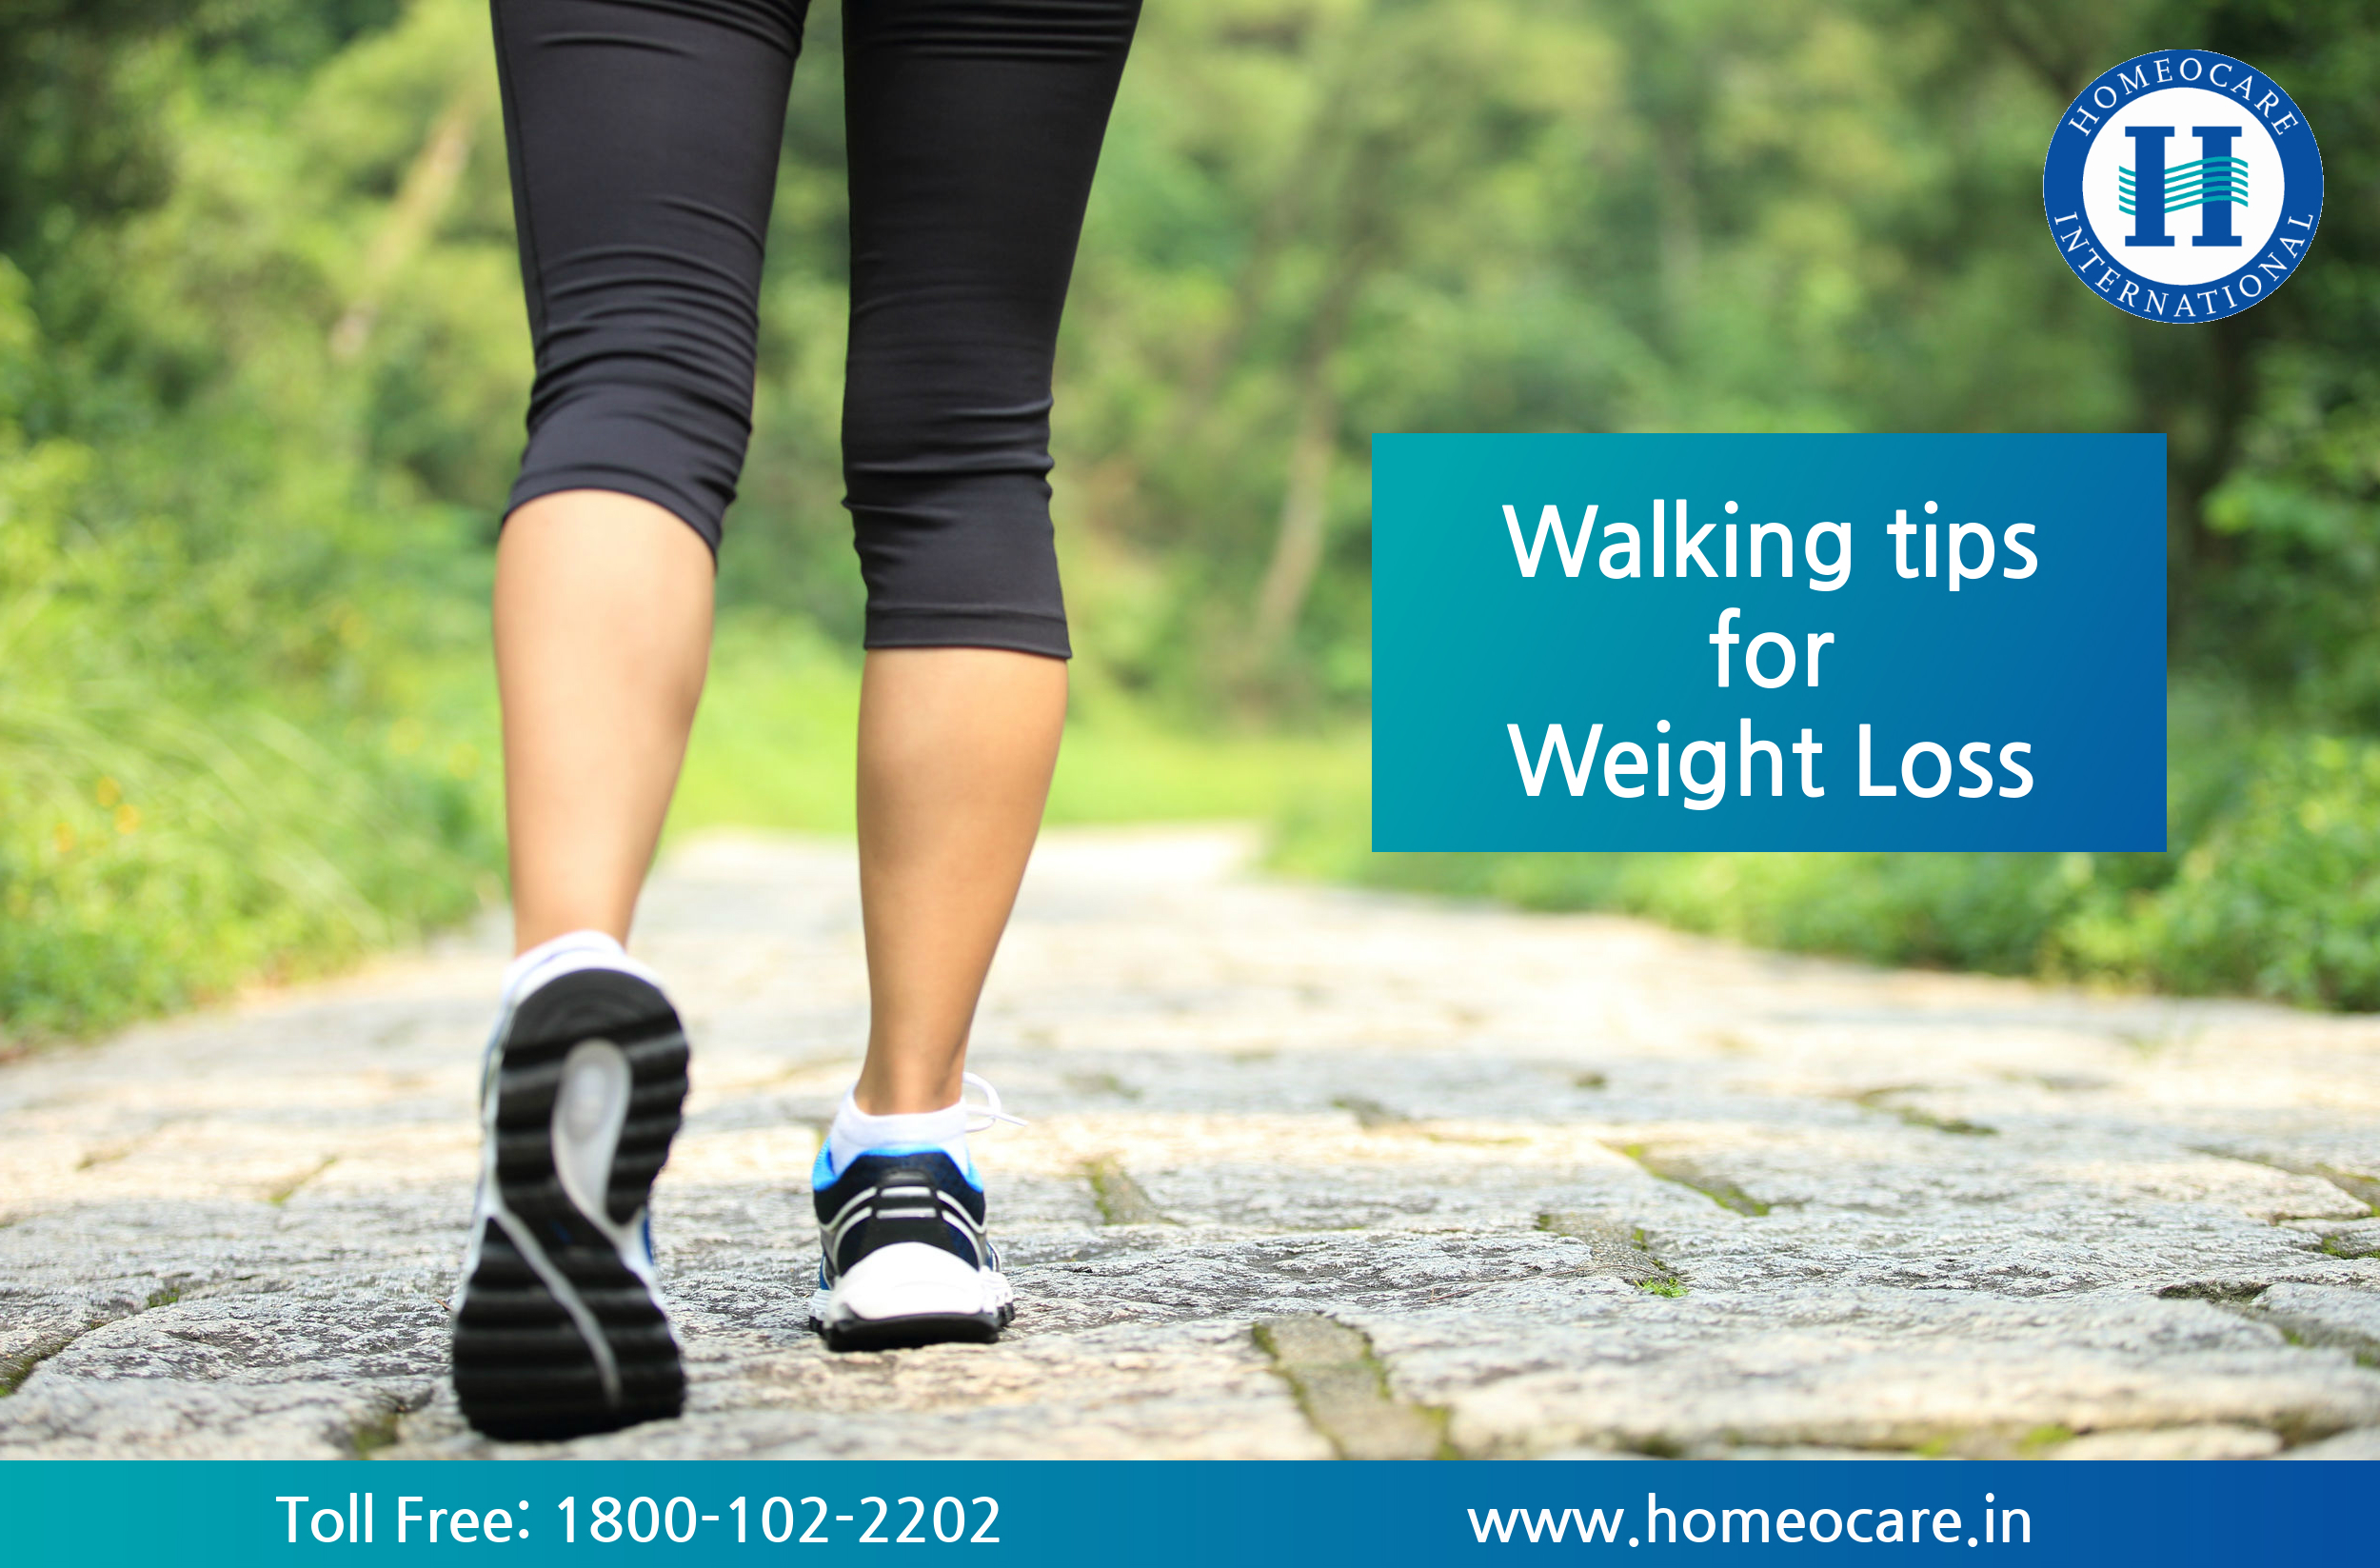 Walking Tips for Weight Loss